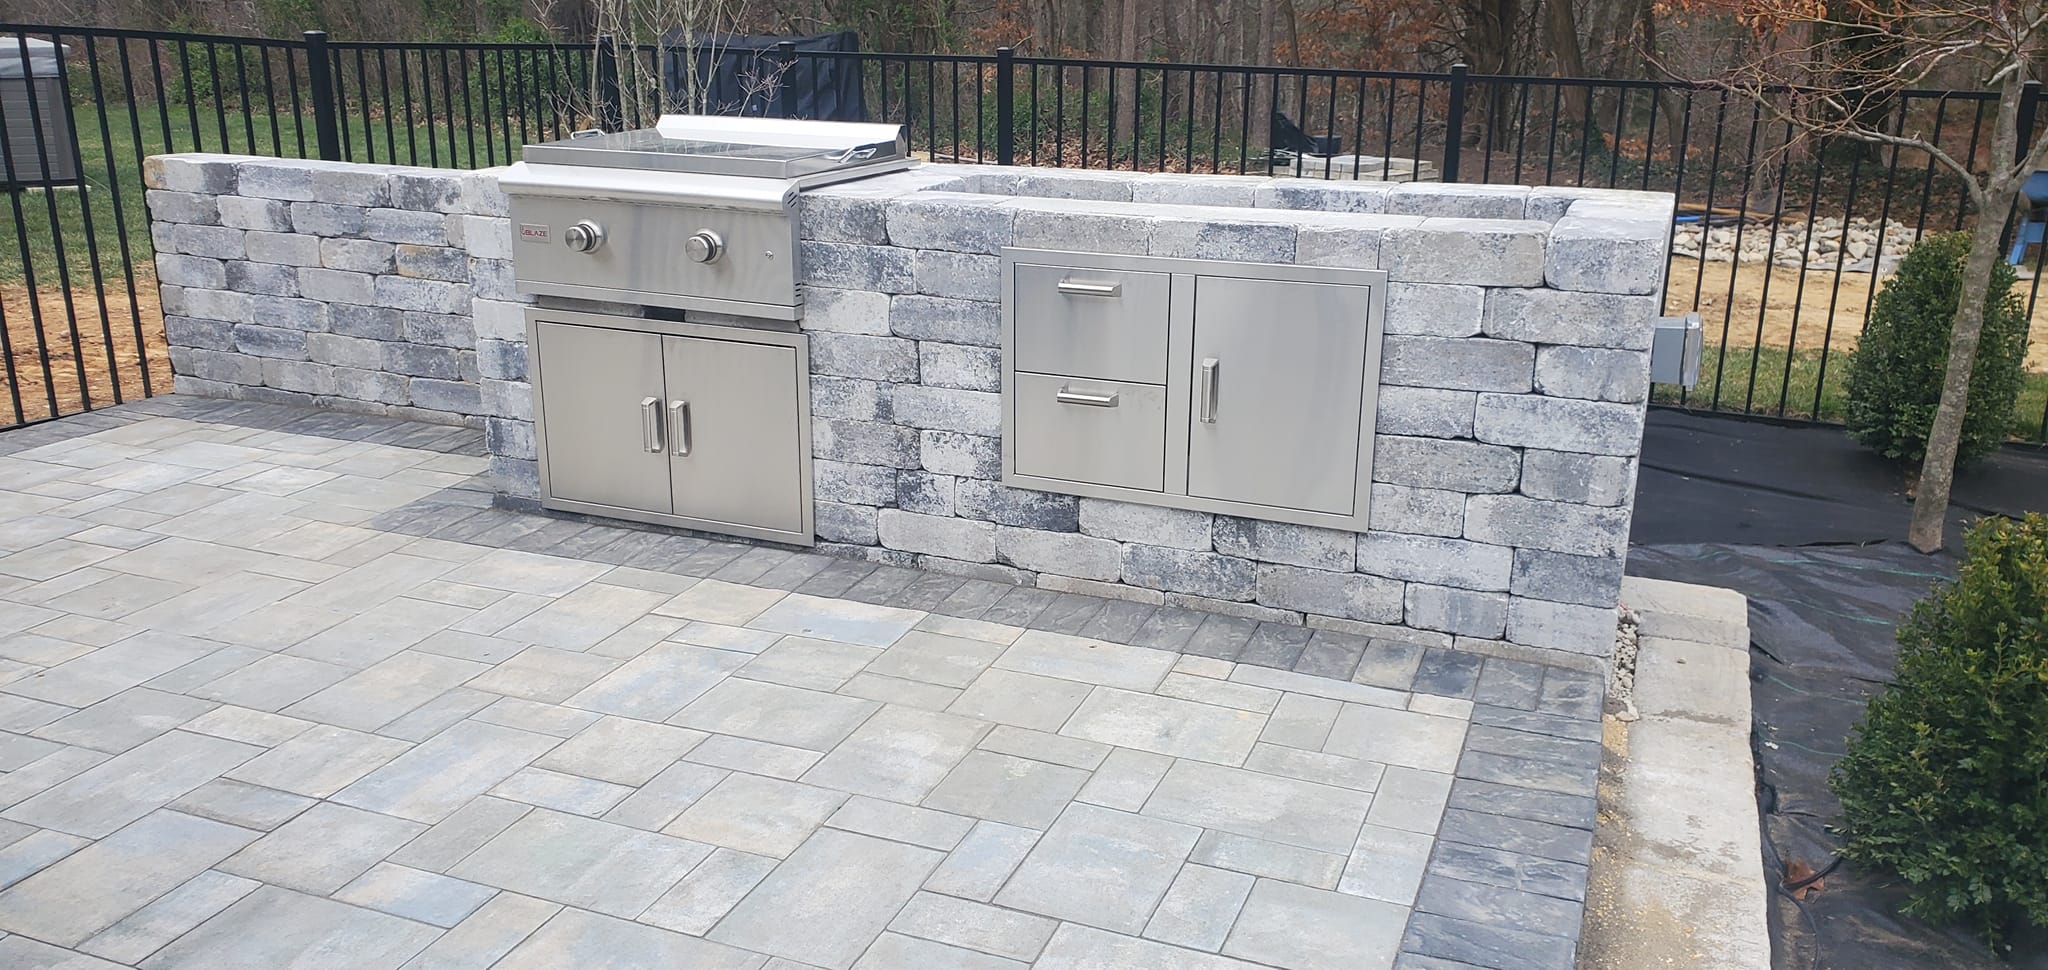 Adam's Lawn & Landscaping Prince George's County Maryland Paver Patio Kitchen